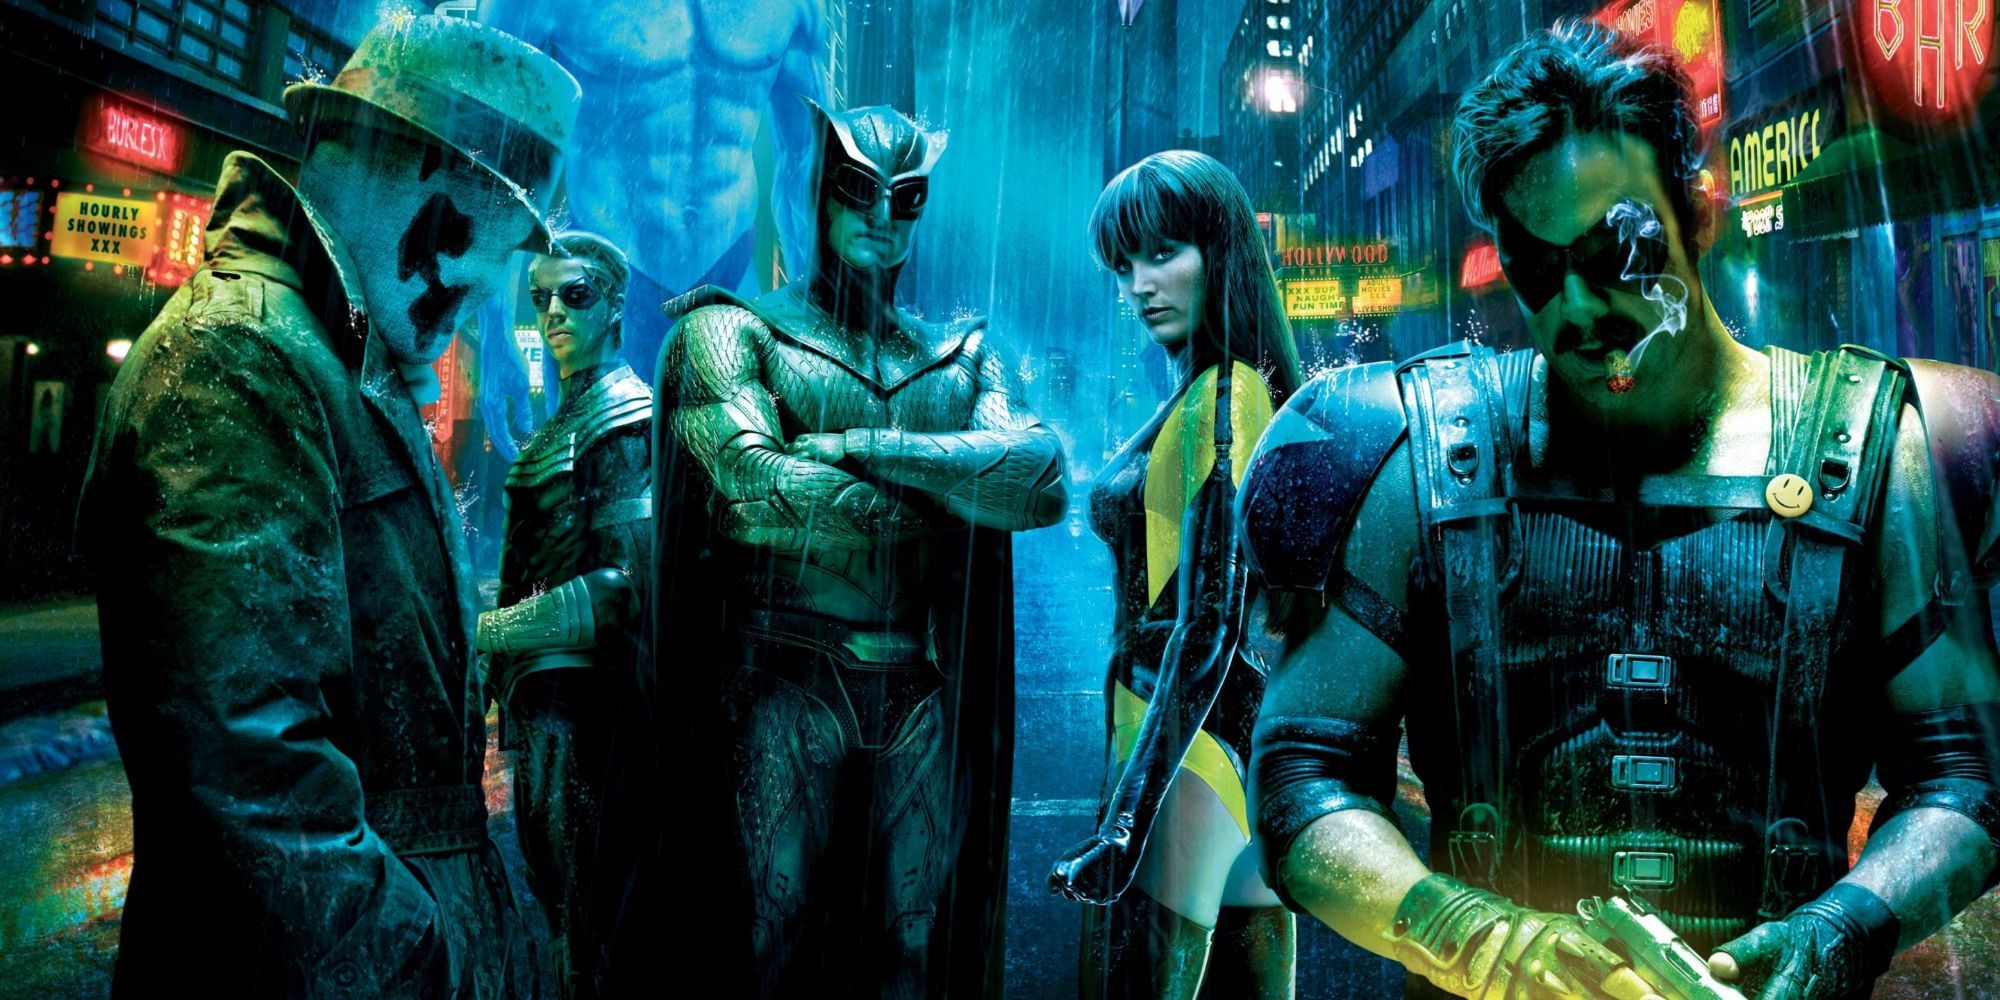 A poster for Watchmen featuring the characters Silk Spectre, Rorschach, Nite Owl and The Comedian